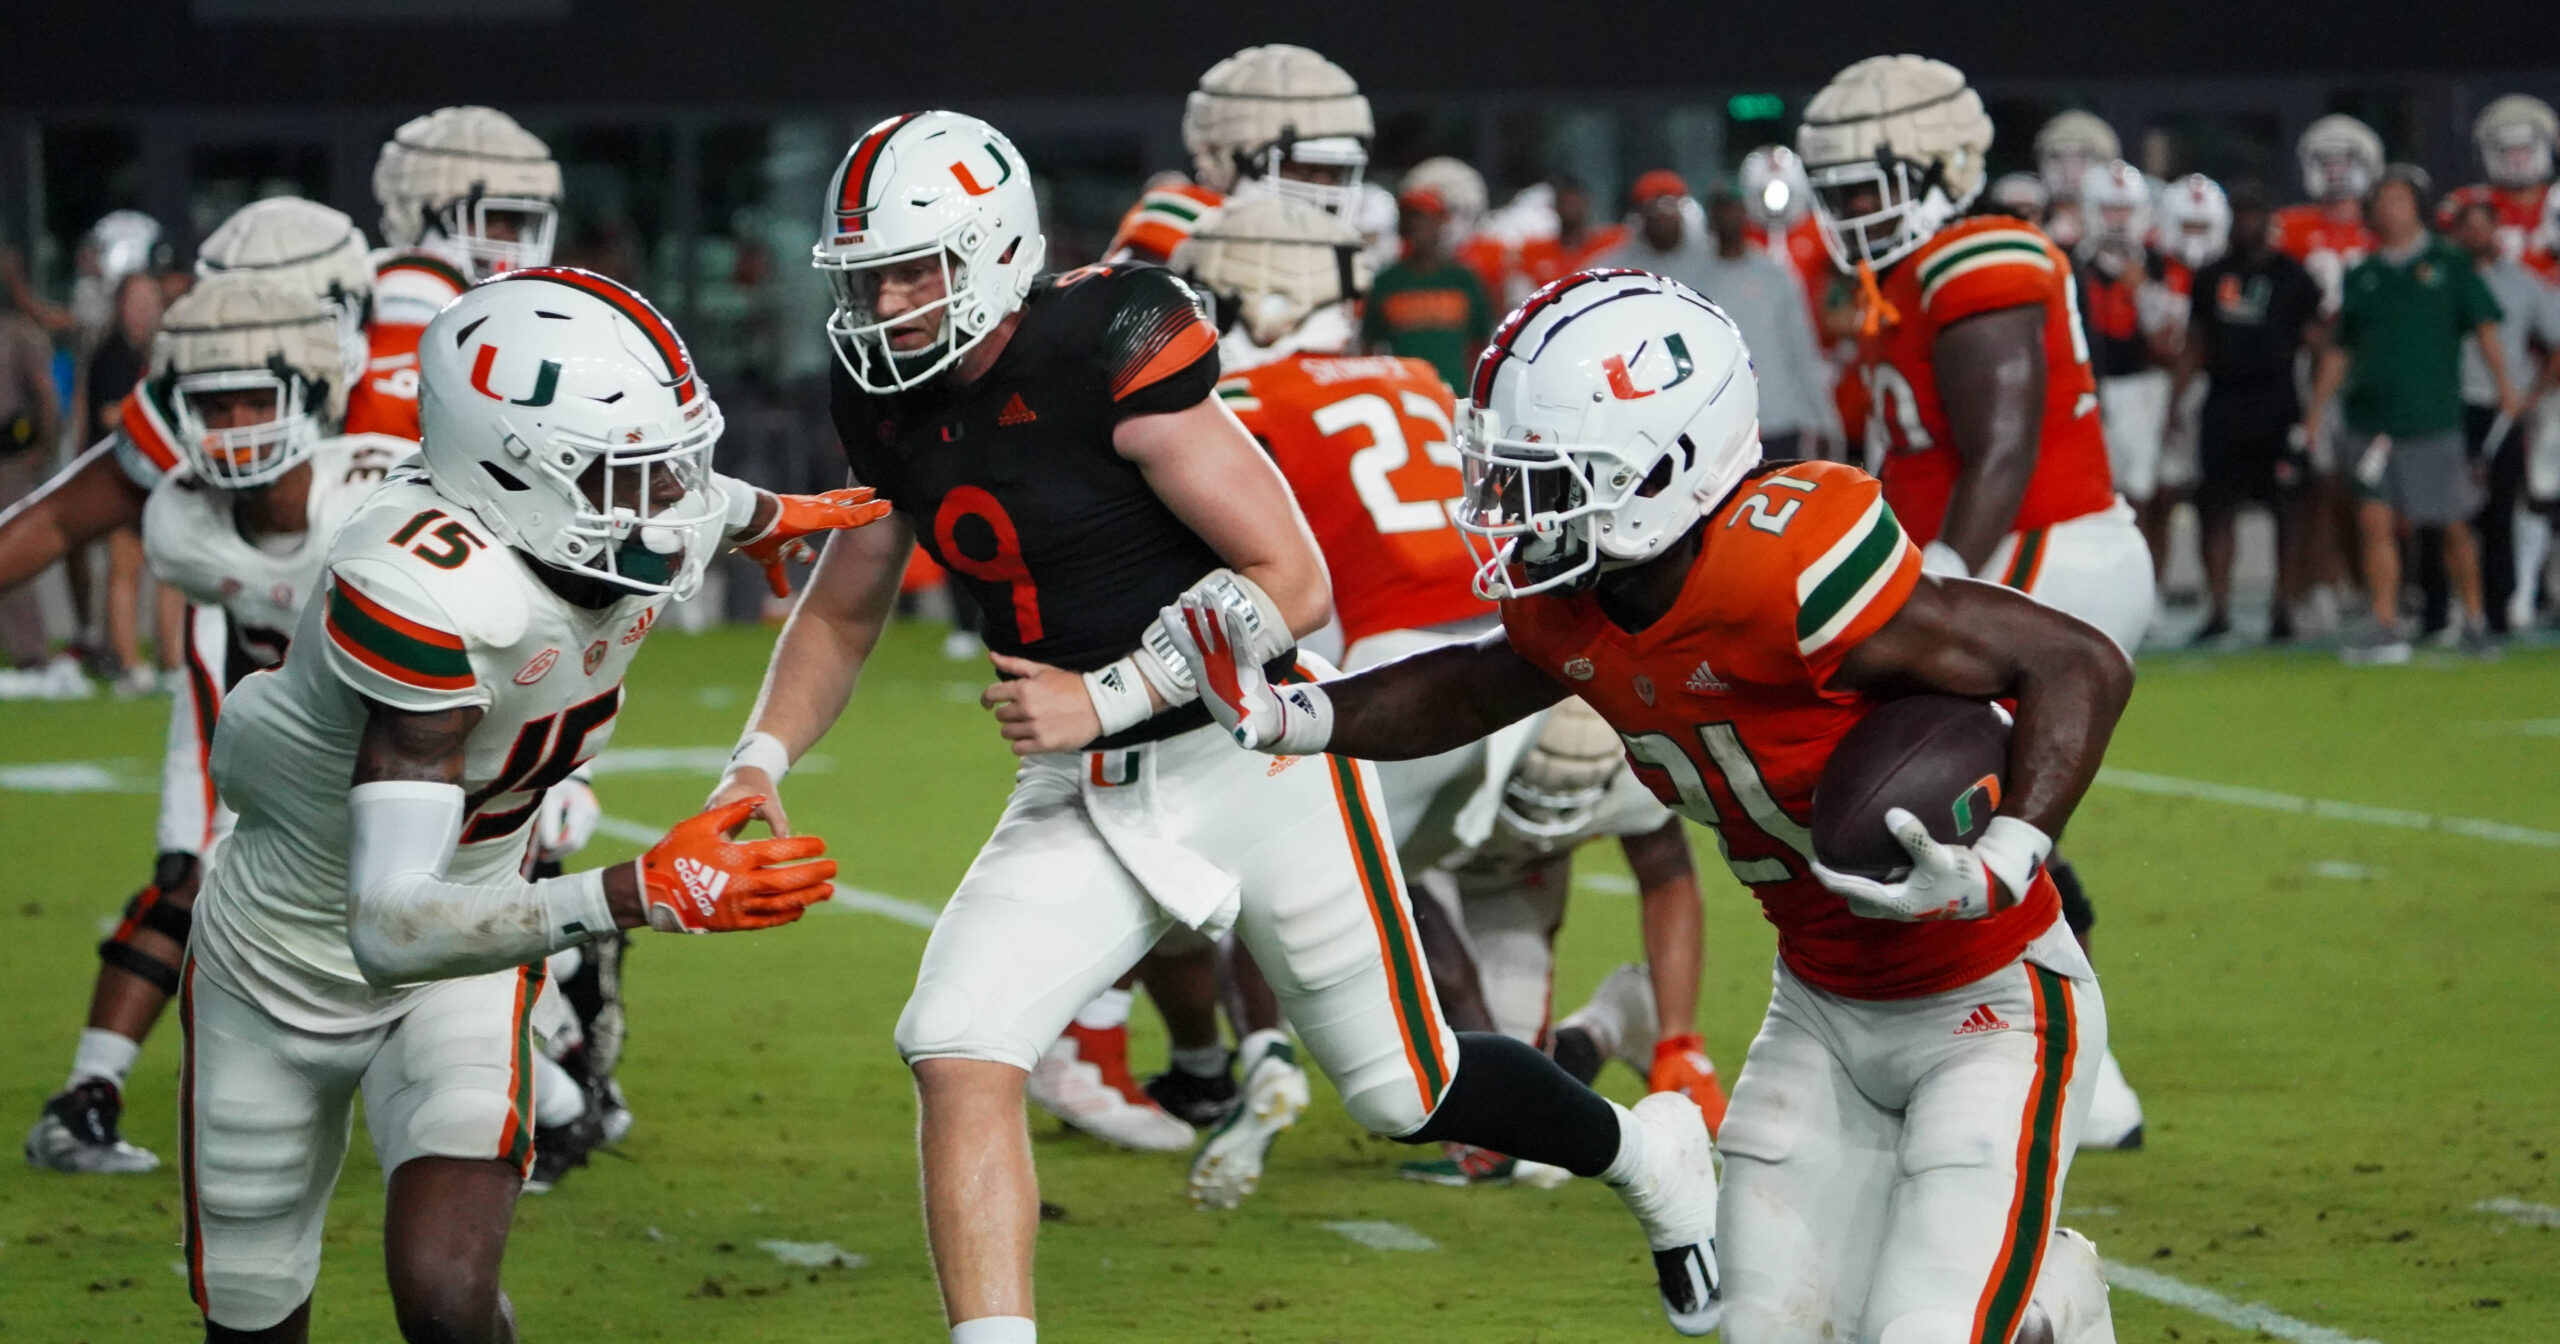 Post-Spring Analysis: Adding two talented freshmen backs in summer could shake up Miami Hurricanes RB room